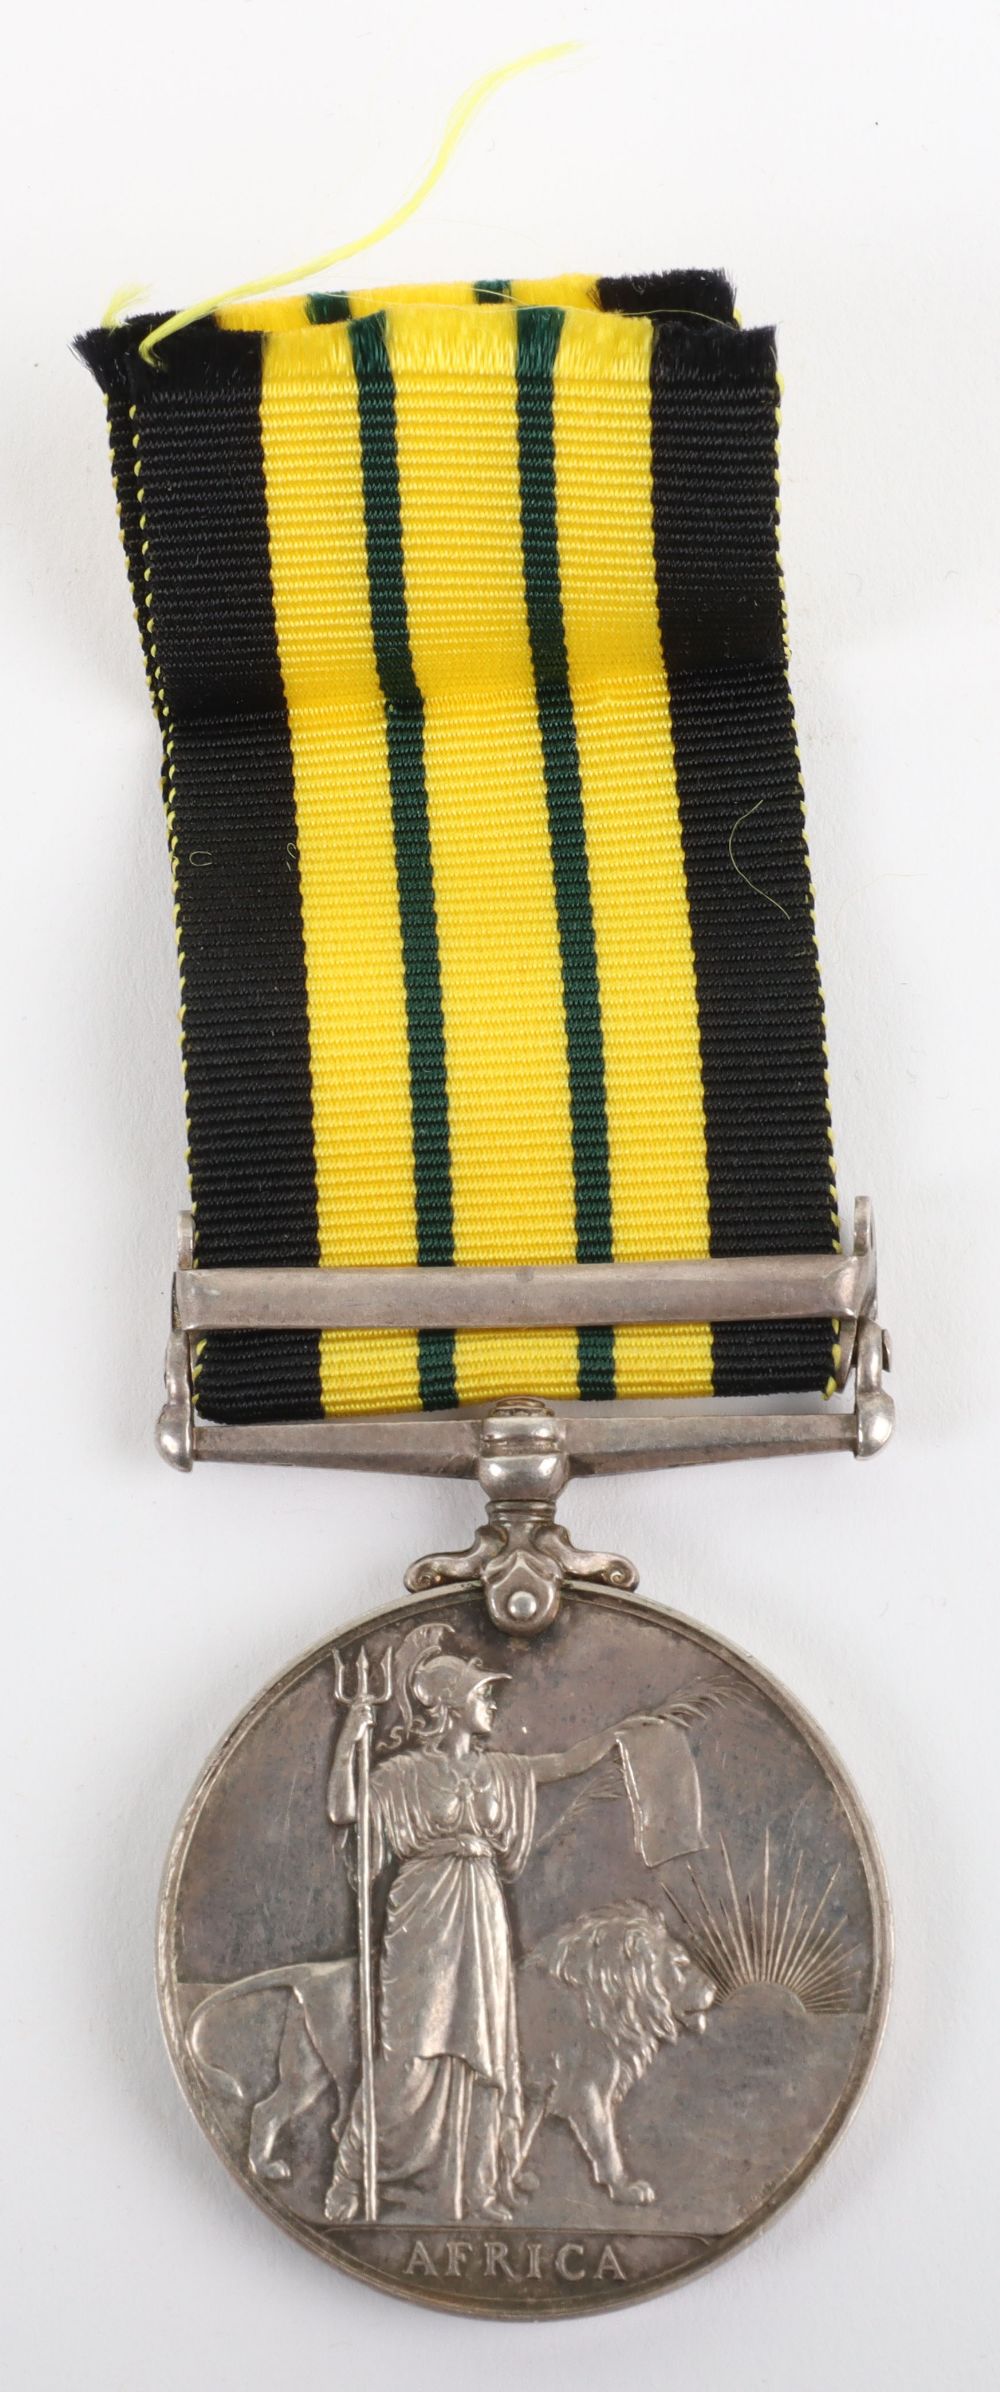 An Unusual Africa General Service Medal for Service in Quelling the Chilembwe Uprising in the Shire - Image 2 of 4